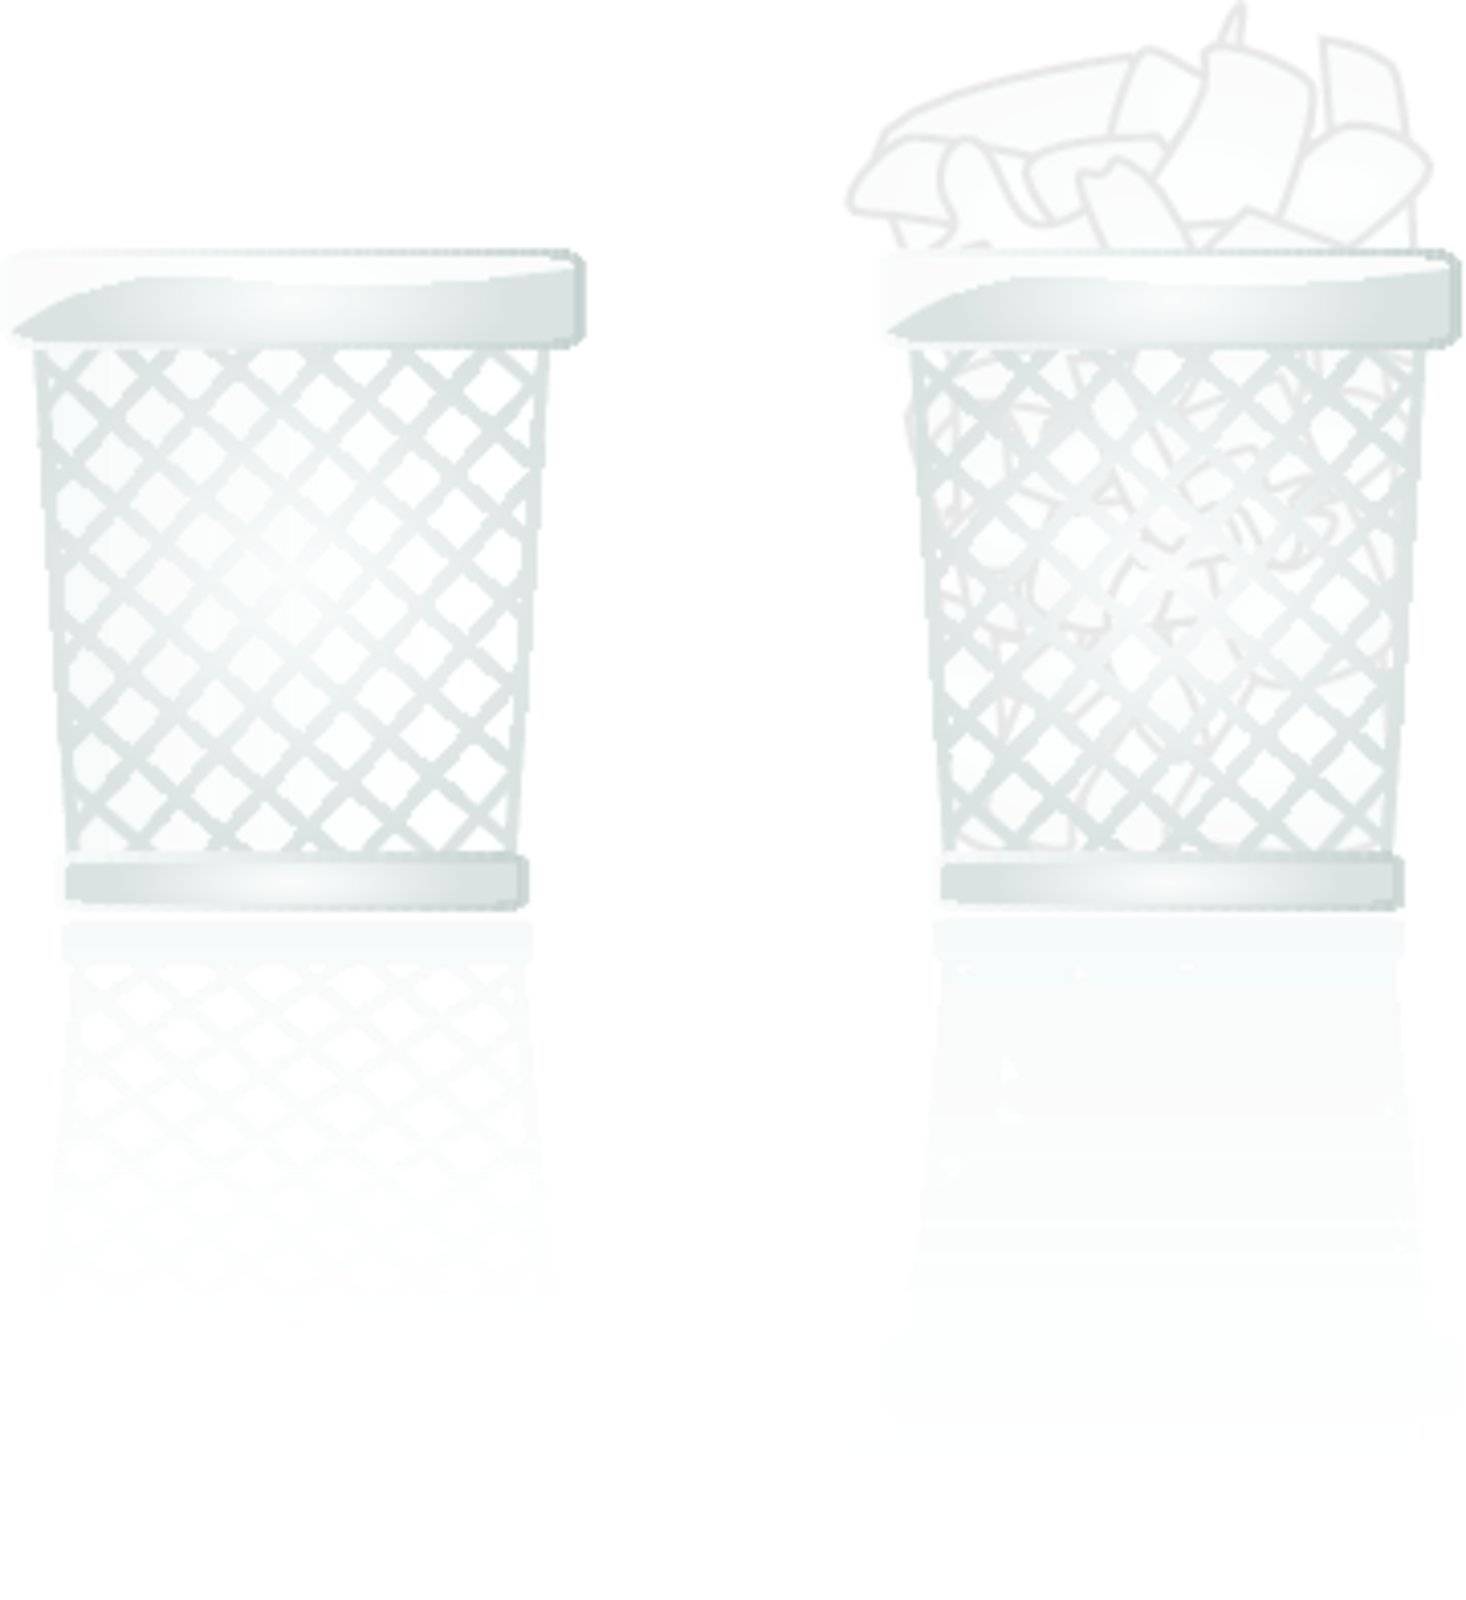 Glossy illustration of an empty and a full garbage can